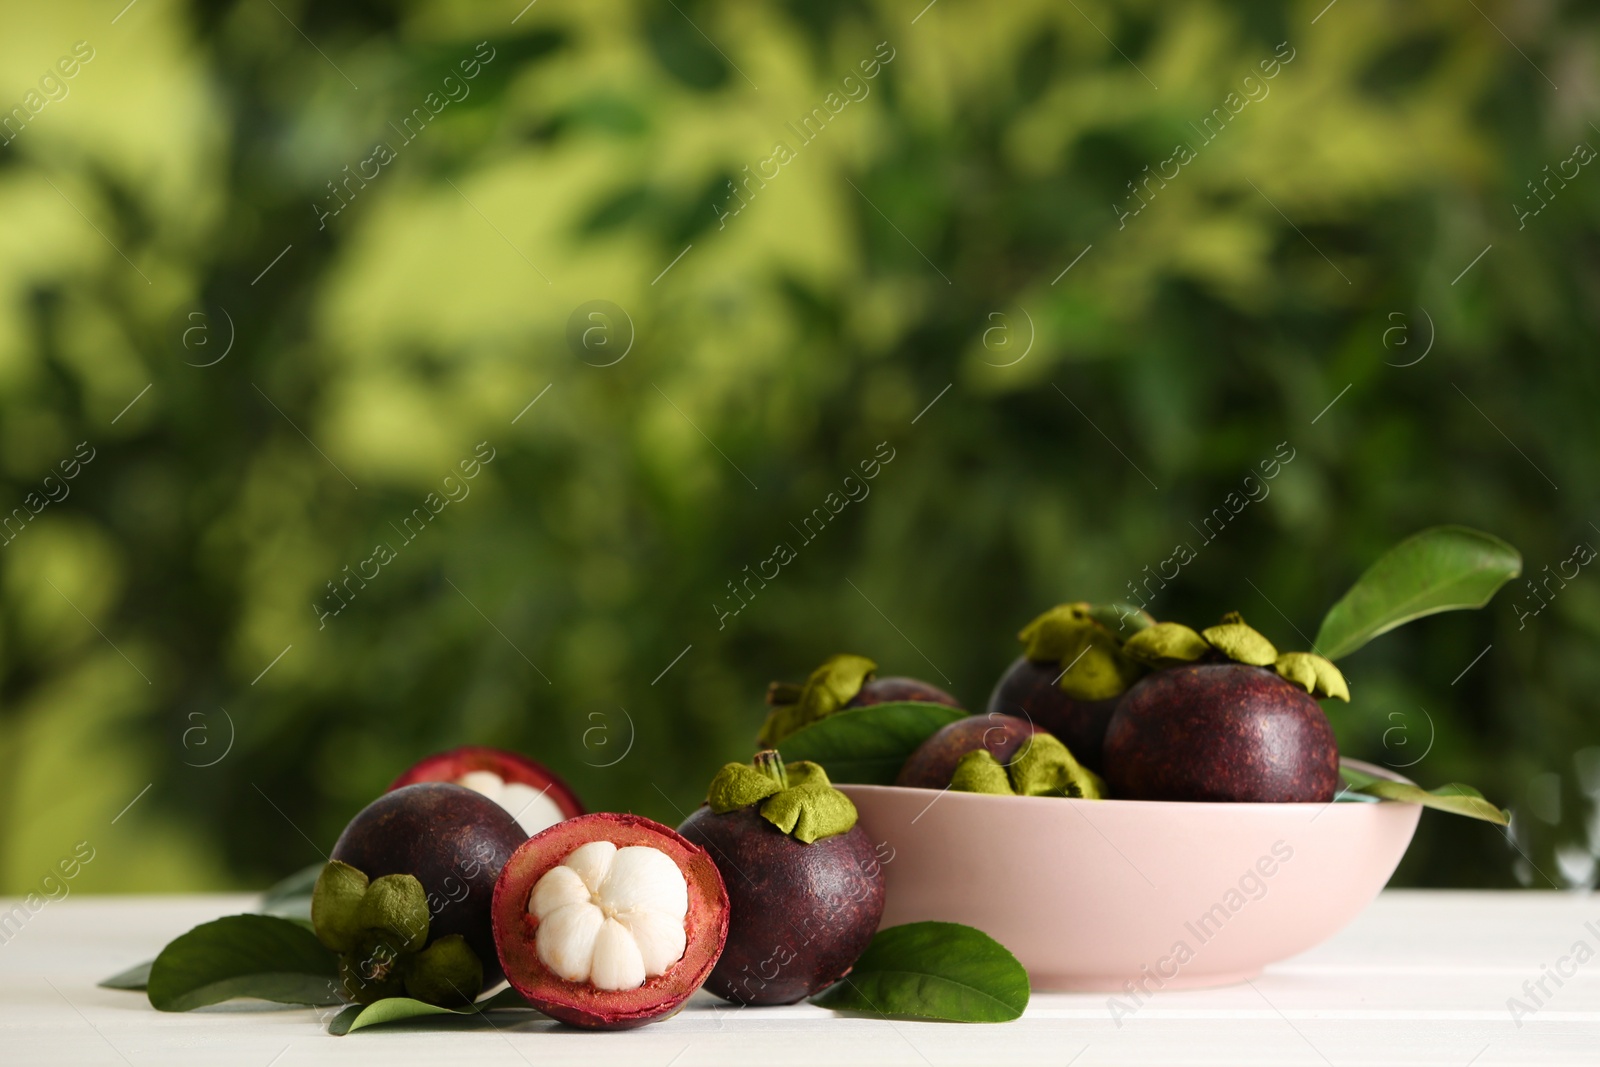 Photo of Delicious ripe mangosteen fruits on white wooden table outdoors, space for text